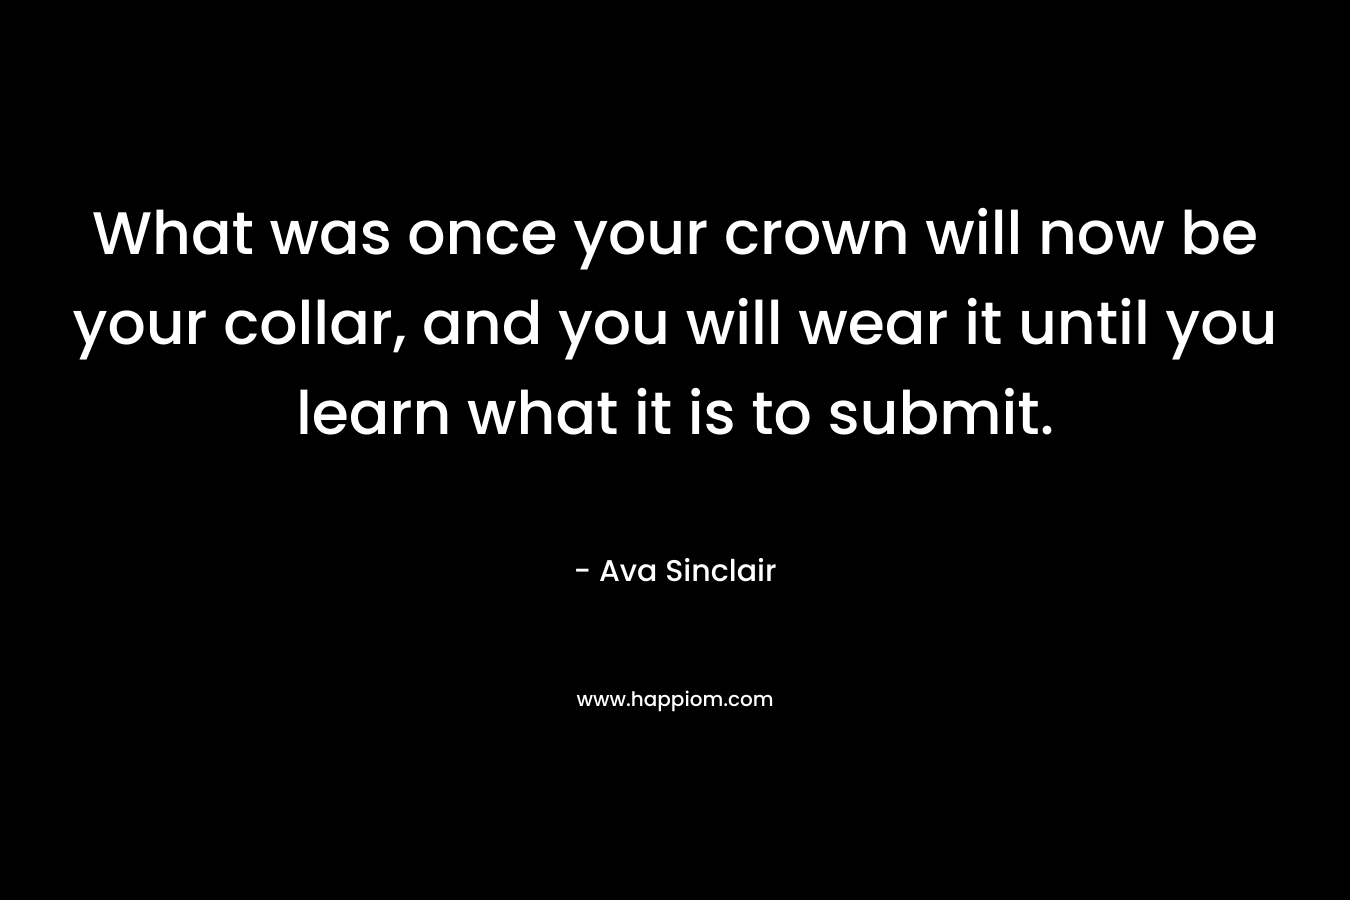 What was once your crown will now be your collar, and you will wear it until you learn what it is to submit. – Ava Sinclair